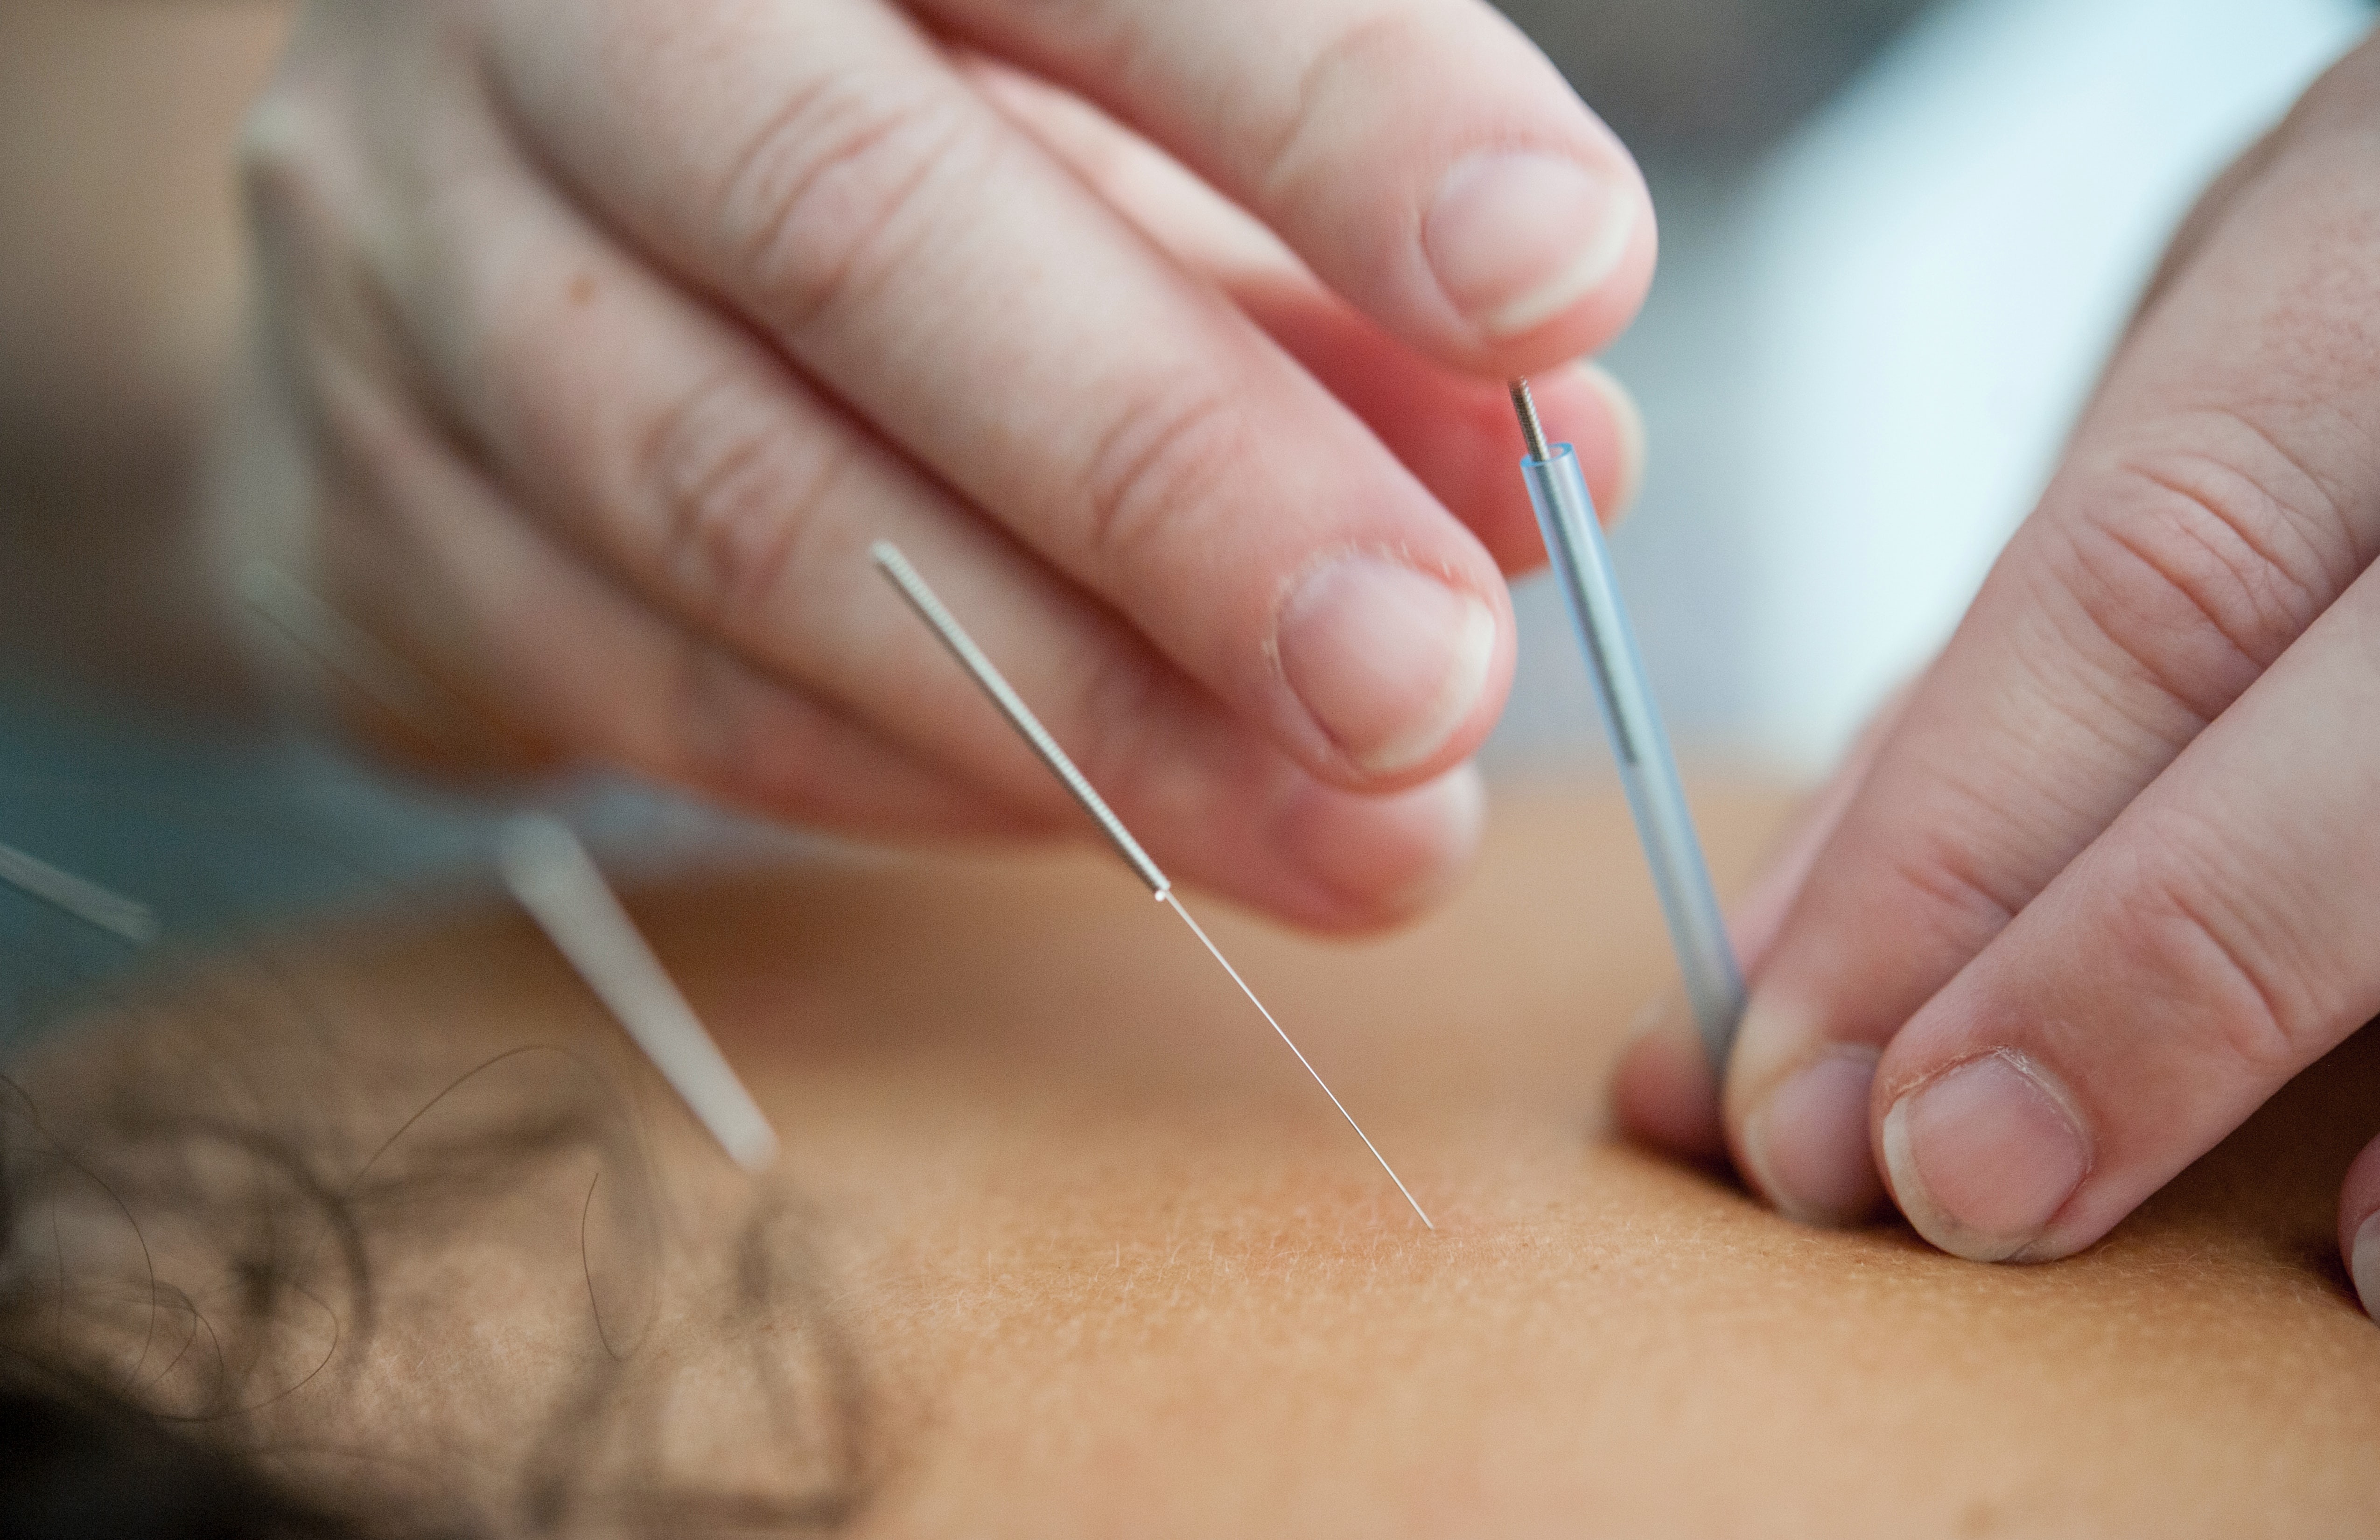 Acupuncture points being utilised for weight loss.